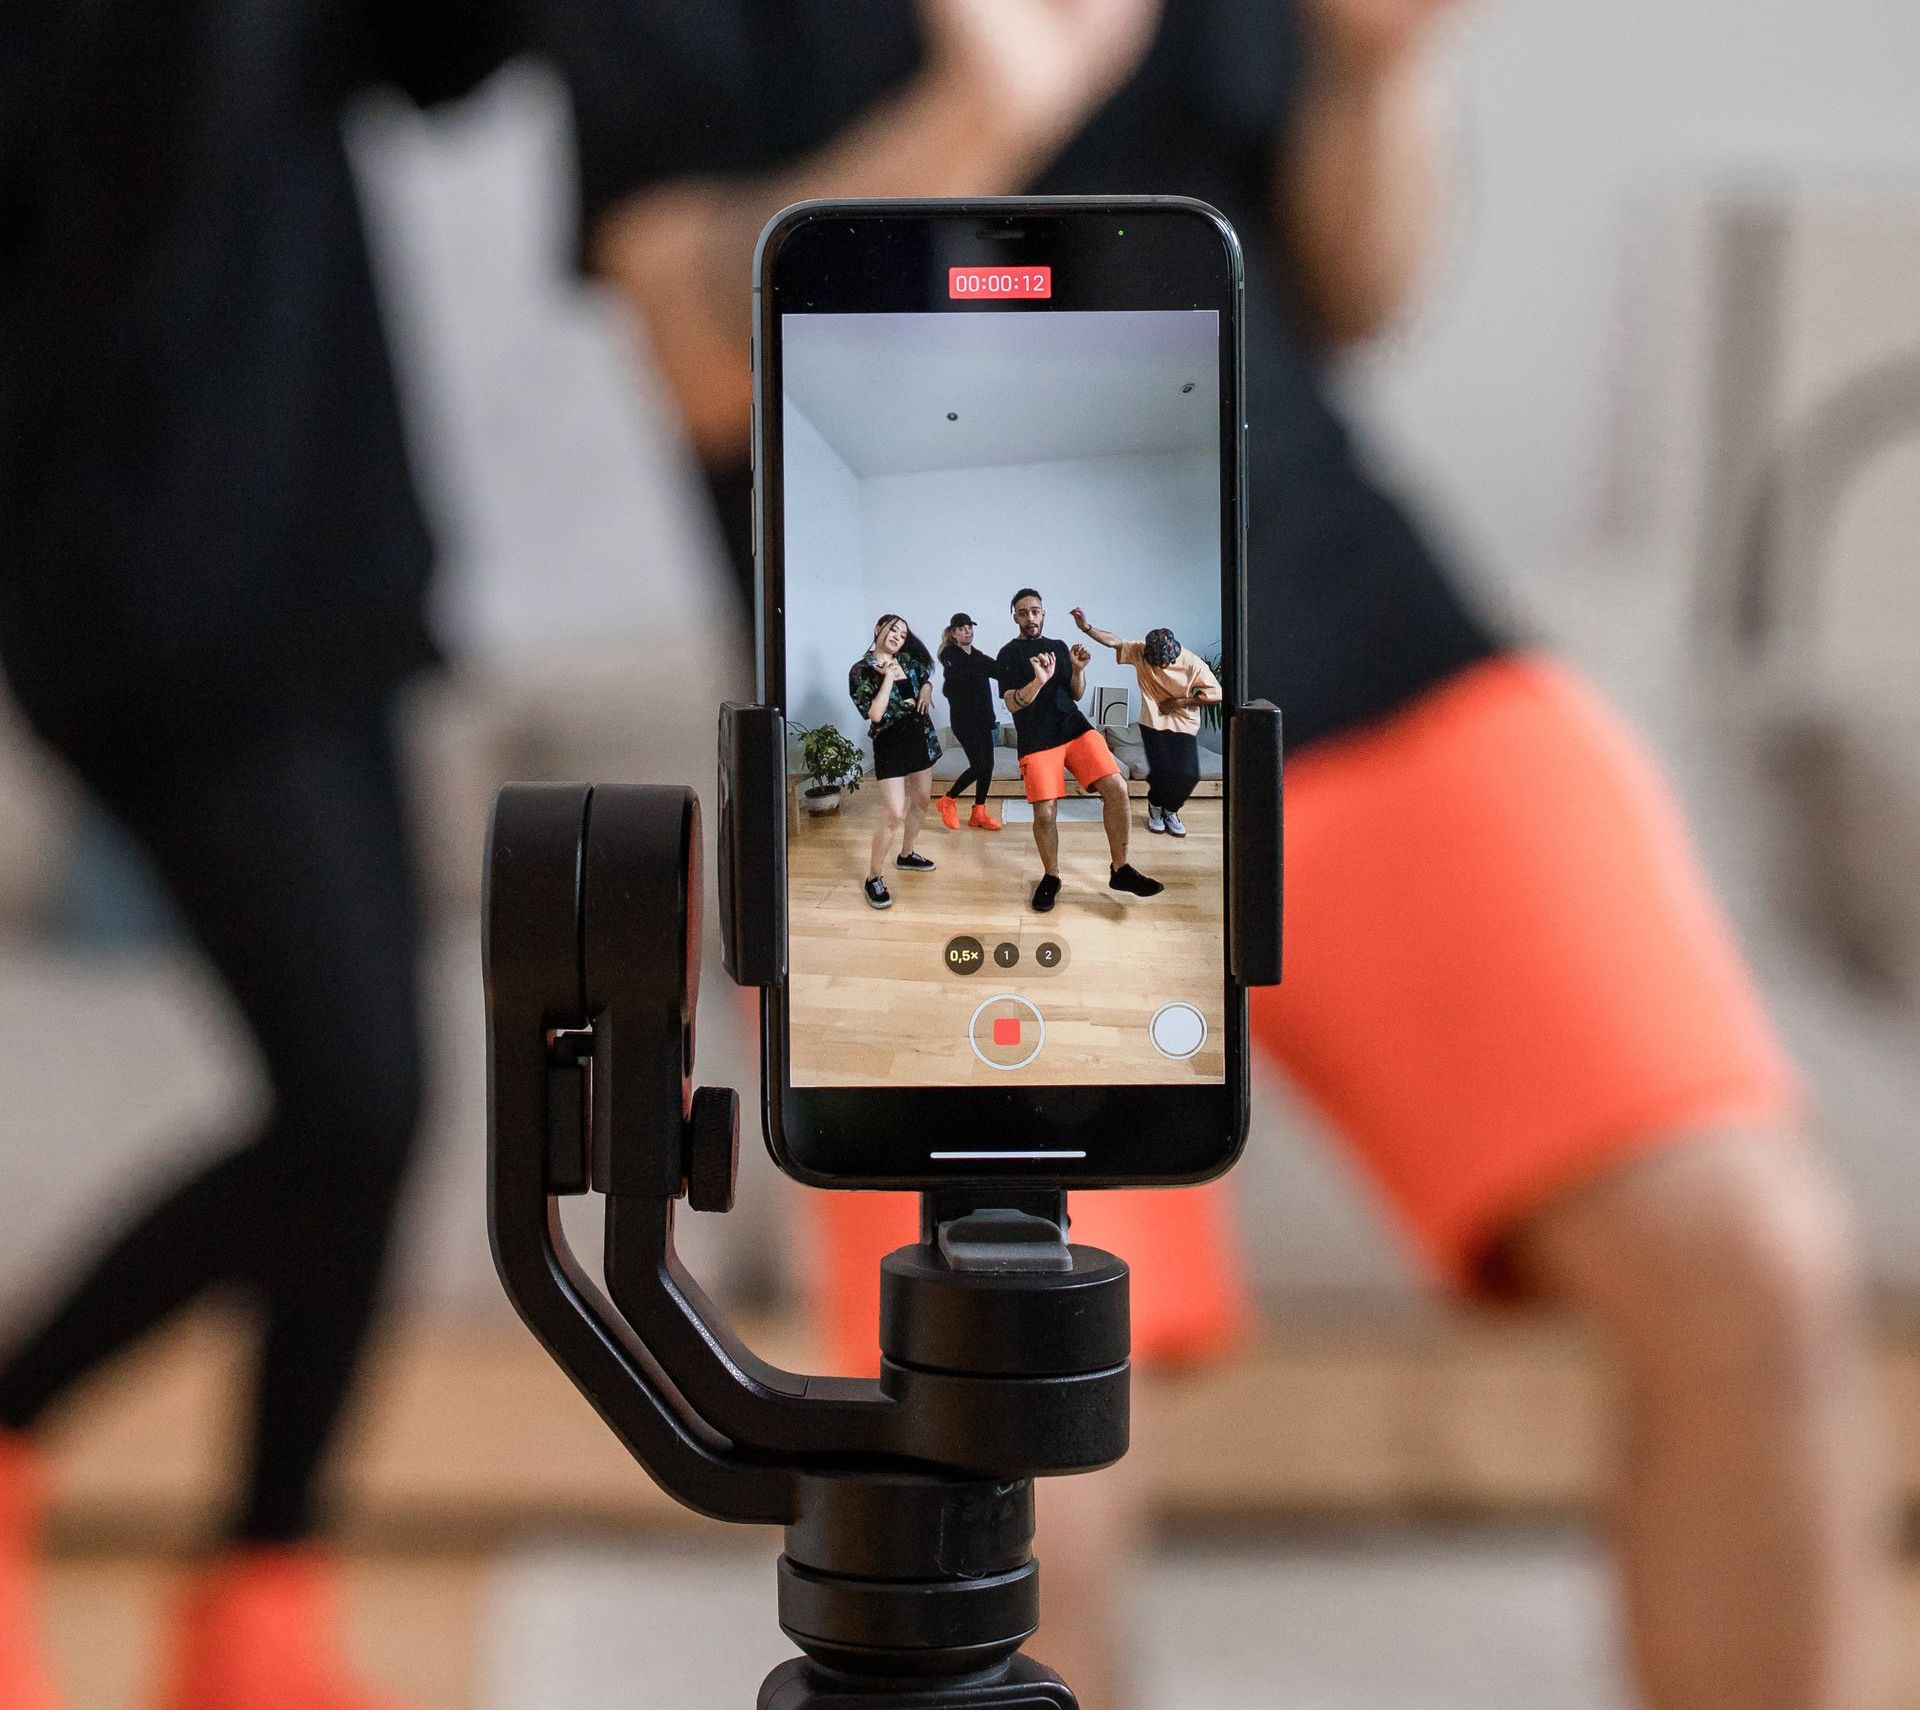 Fitness instructor recording fitness video on iPhone